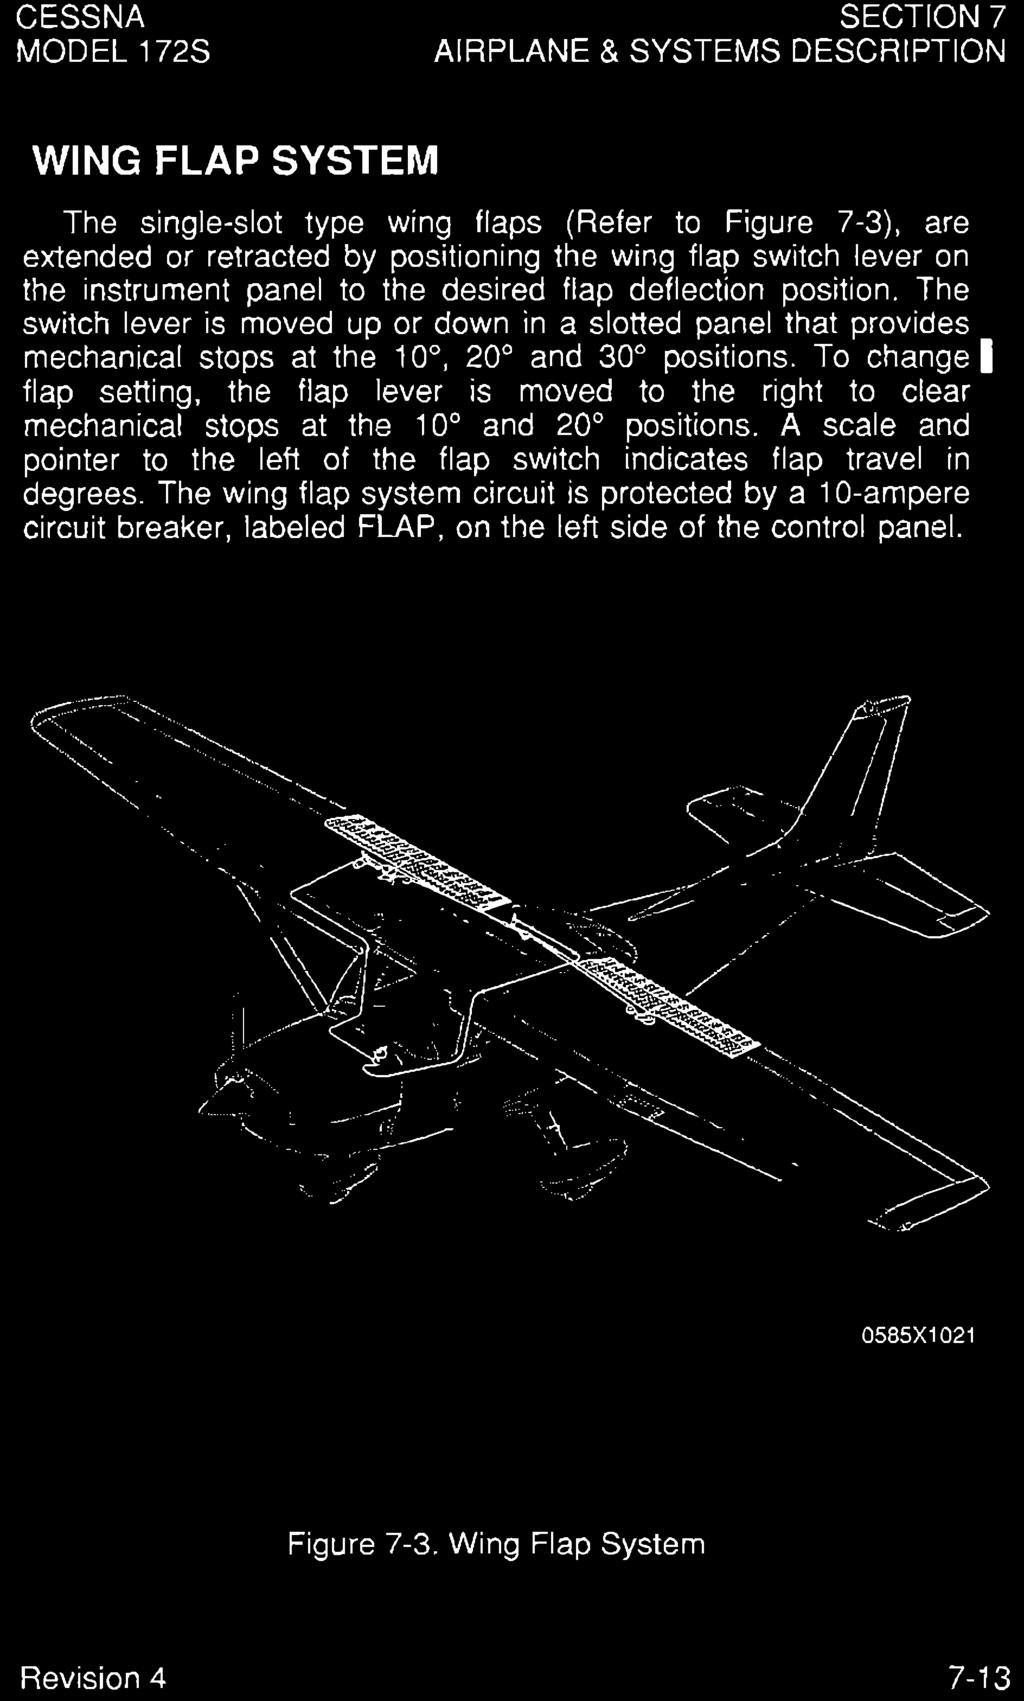 SECTION 7 AIRPLANE & SYSTEMS DESCRIPTION WING FLAP SYSTEM The single-slot type wing flaps (Refer to Figure 7-3), are extended or retracted by position ing the wing flap switch lever on the instrument